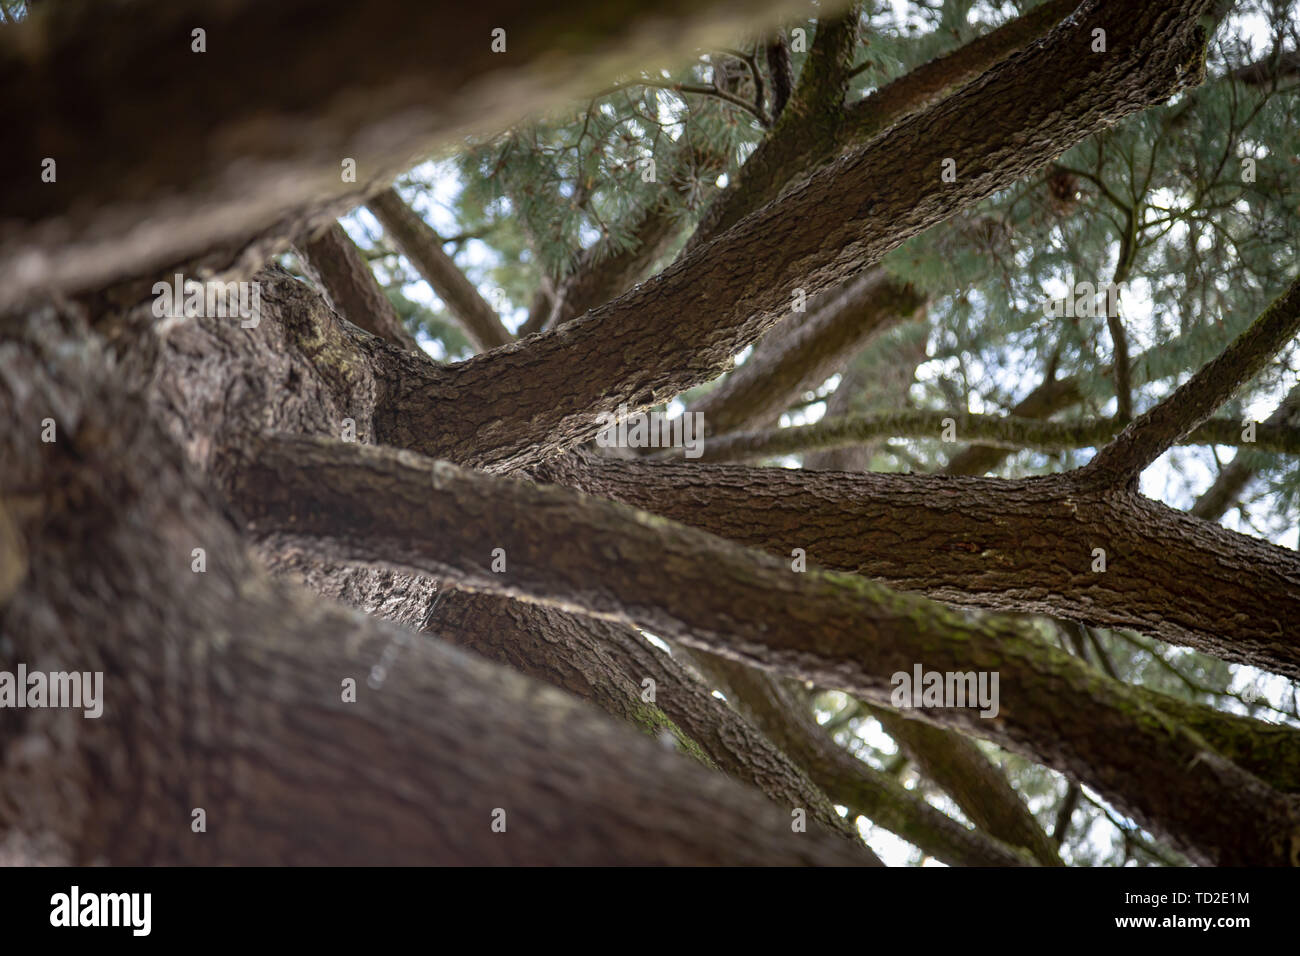 Looking upwards through the branches of a pine tree in Kew Gardens, London. Stock Photo